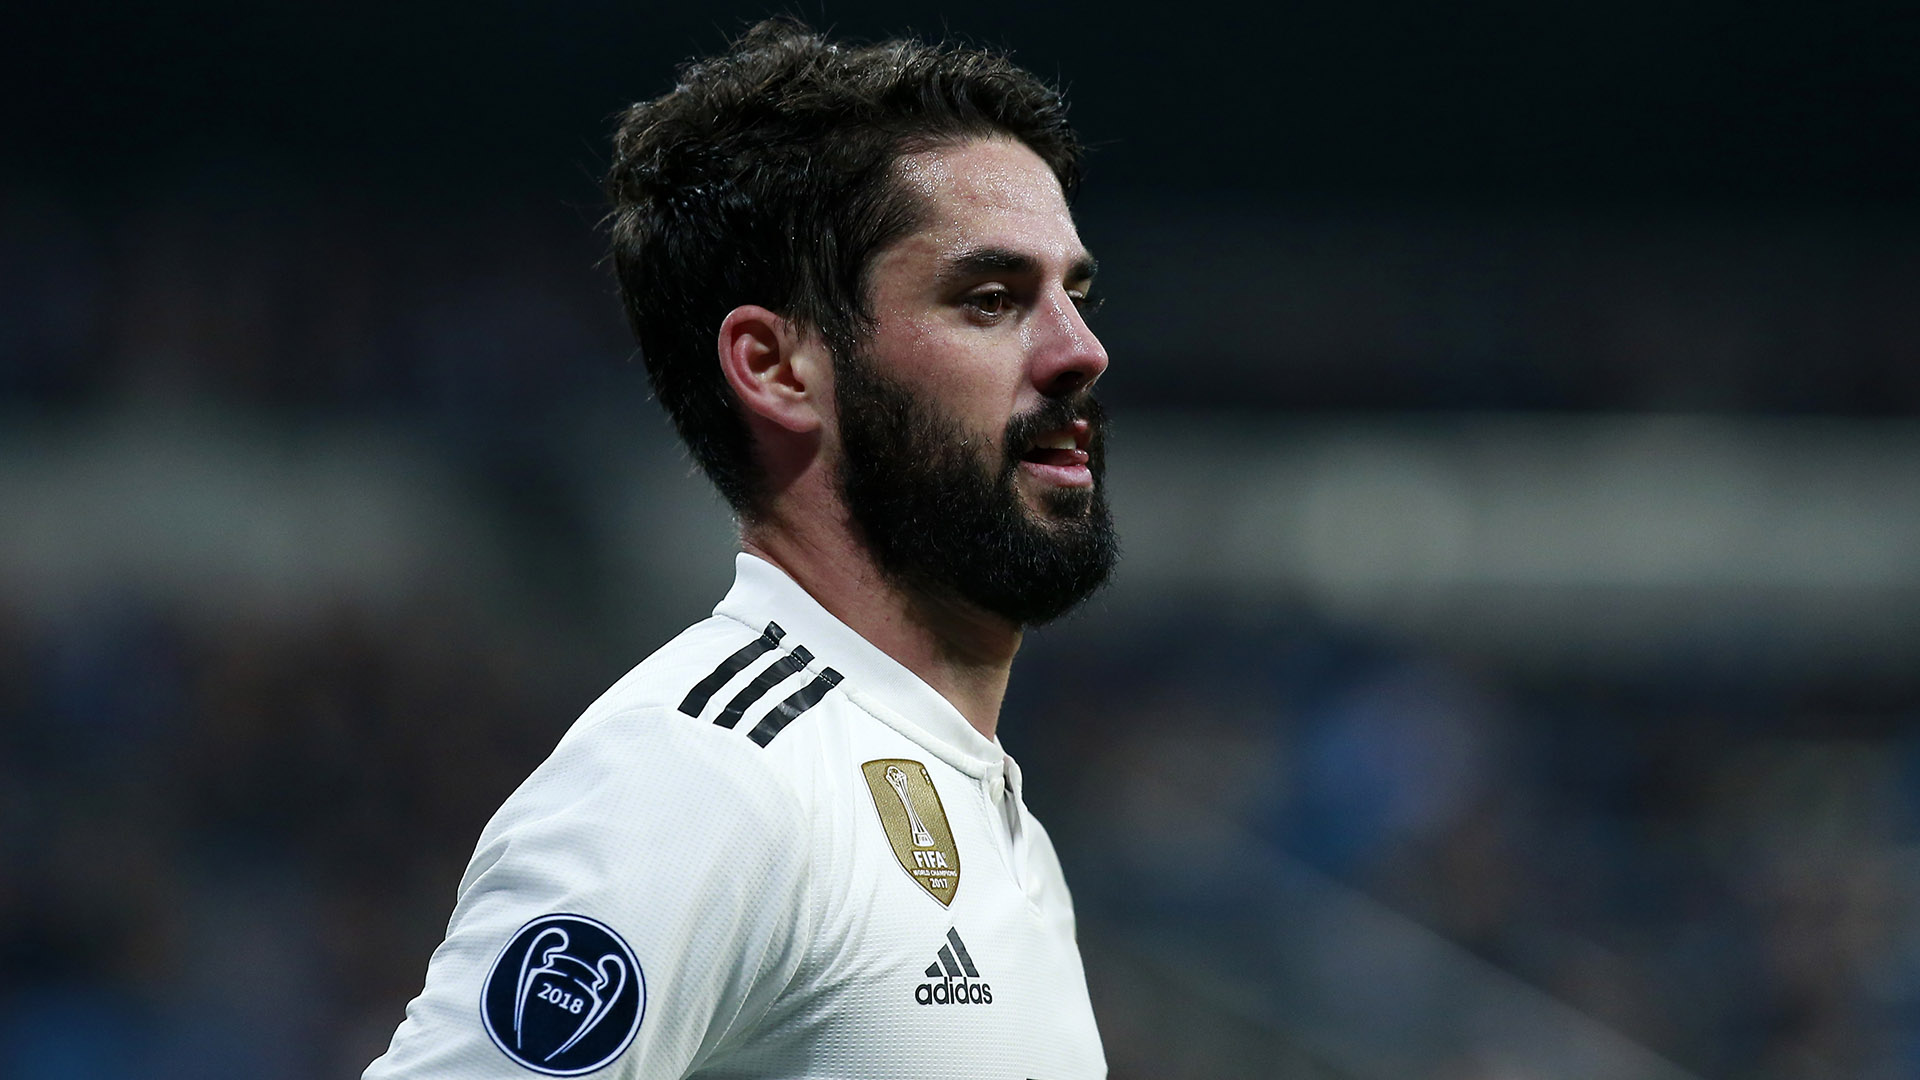 Transfer news and rumours LIVE: Real Madrid may use Isco in Hazard swap | Goal.com1920 x 1080